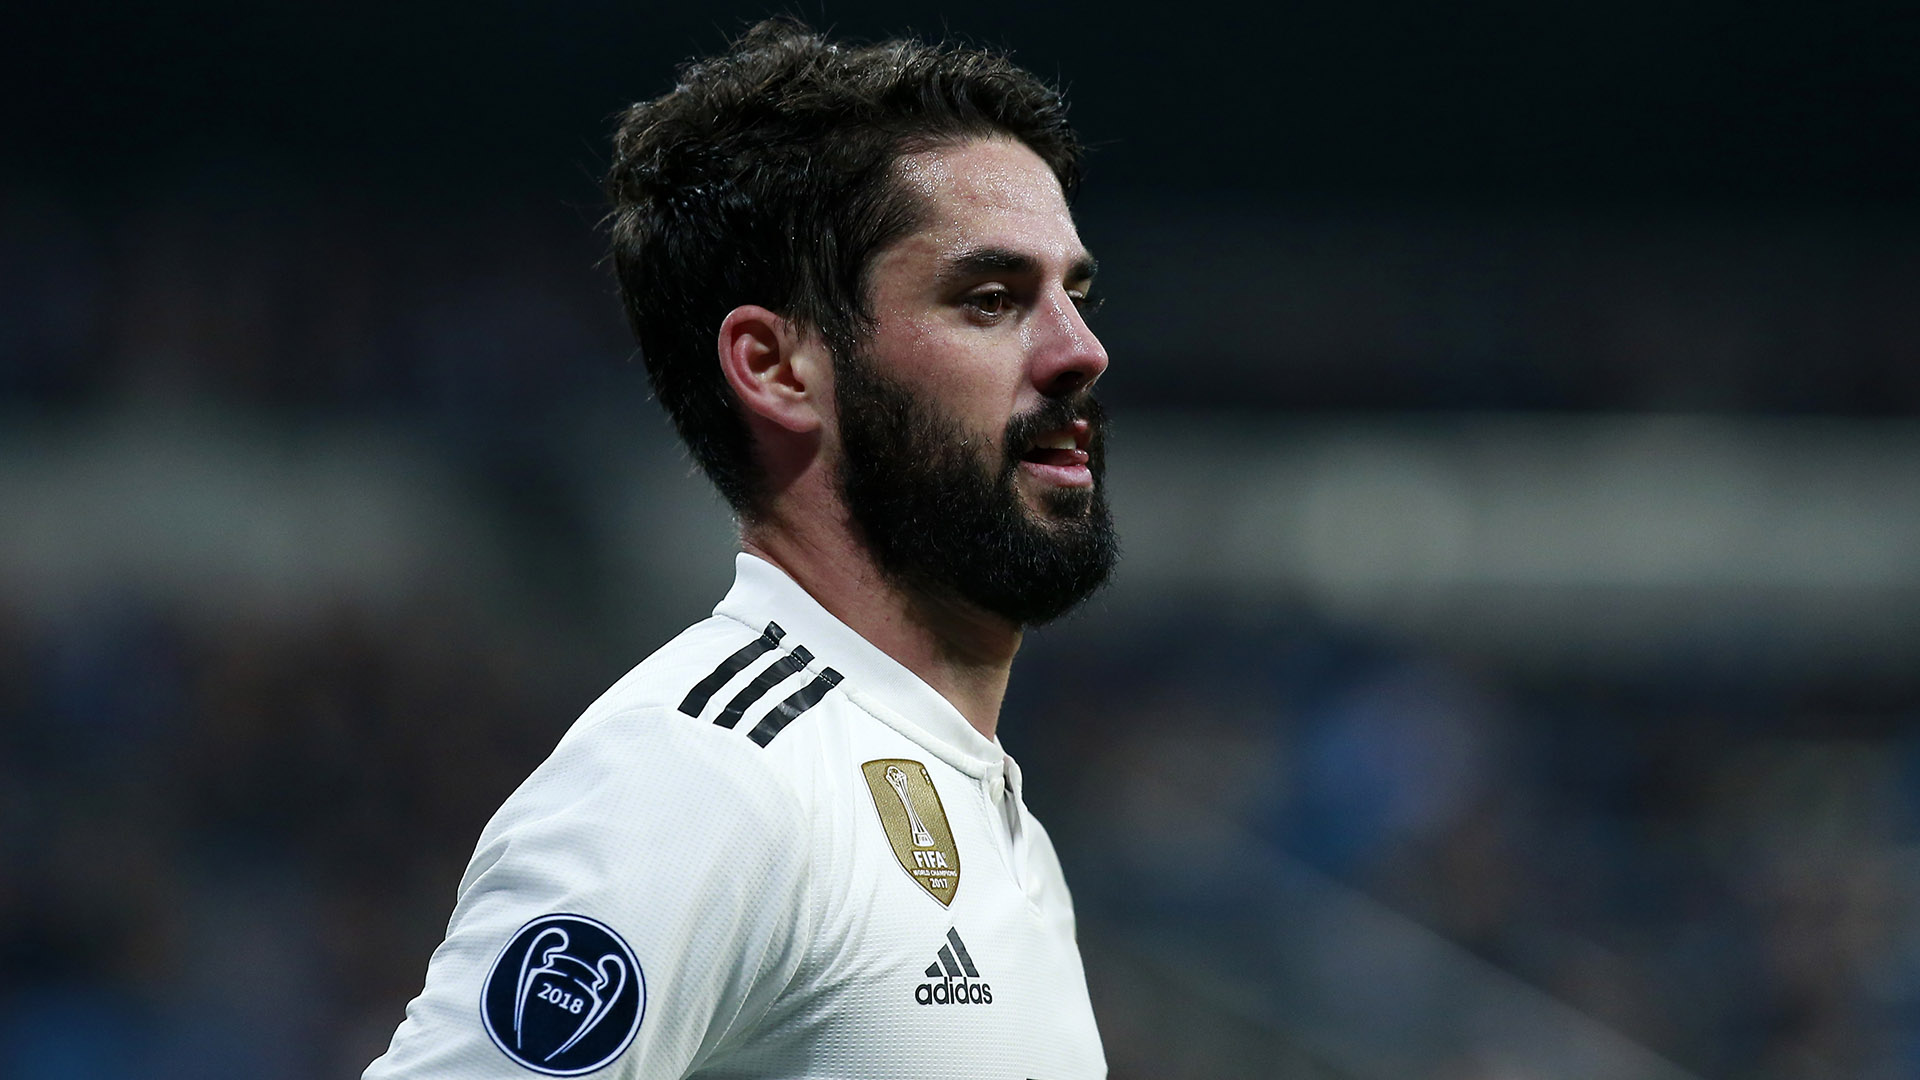 Transfer news and rumours LIVE: Real Madrid may use Isco in Hazard swap | Goal.com1920 x 1080